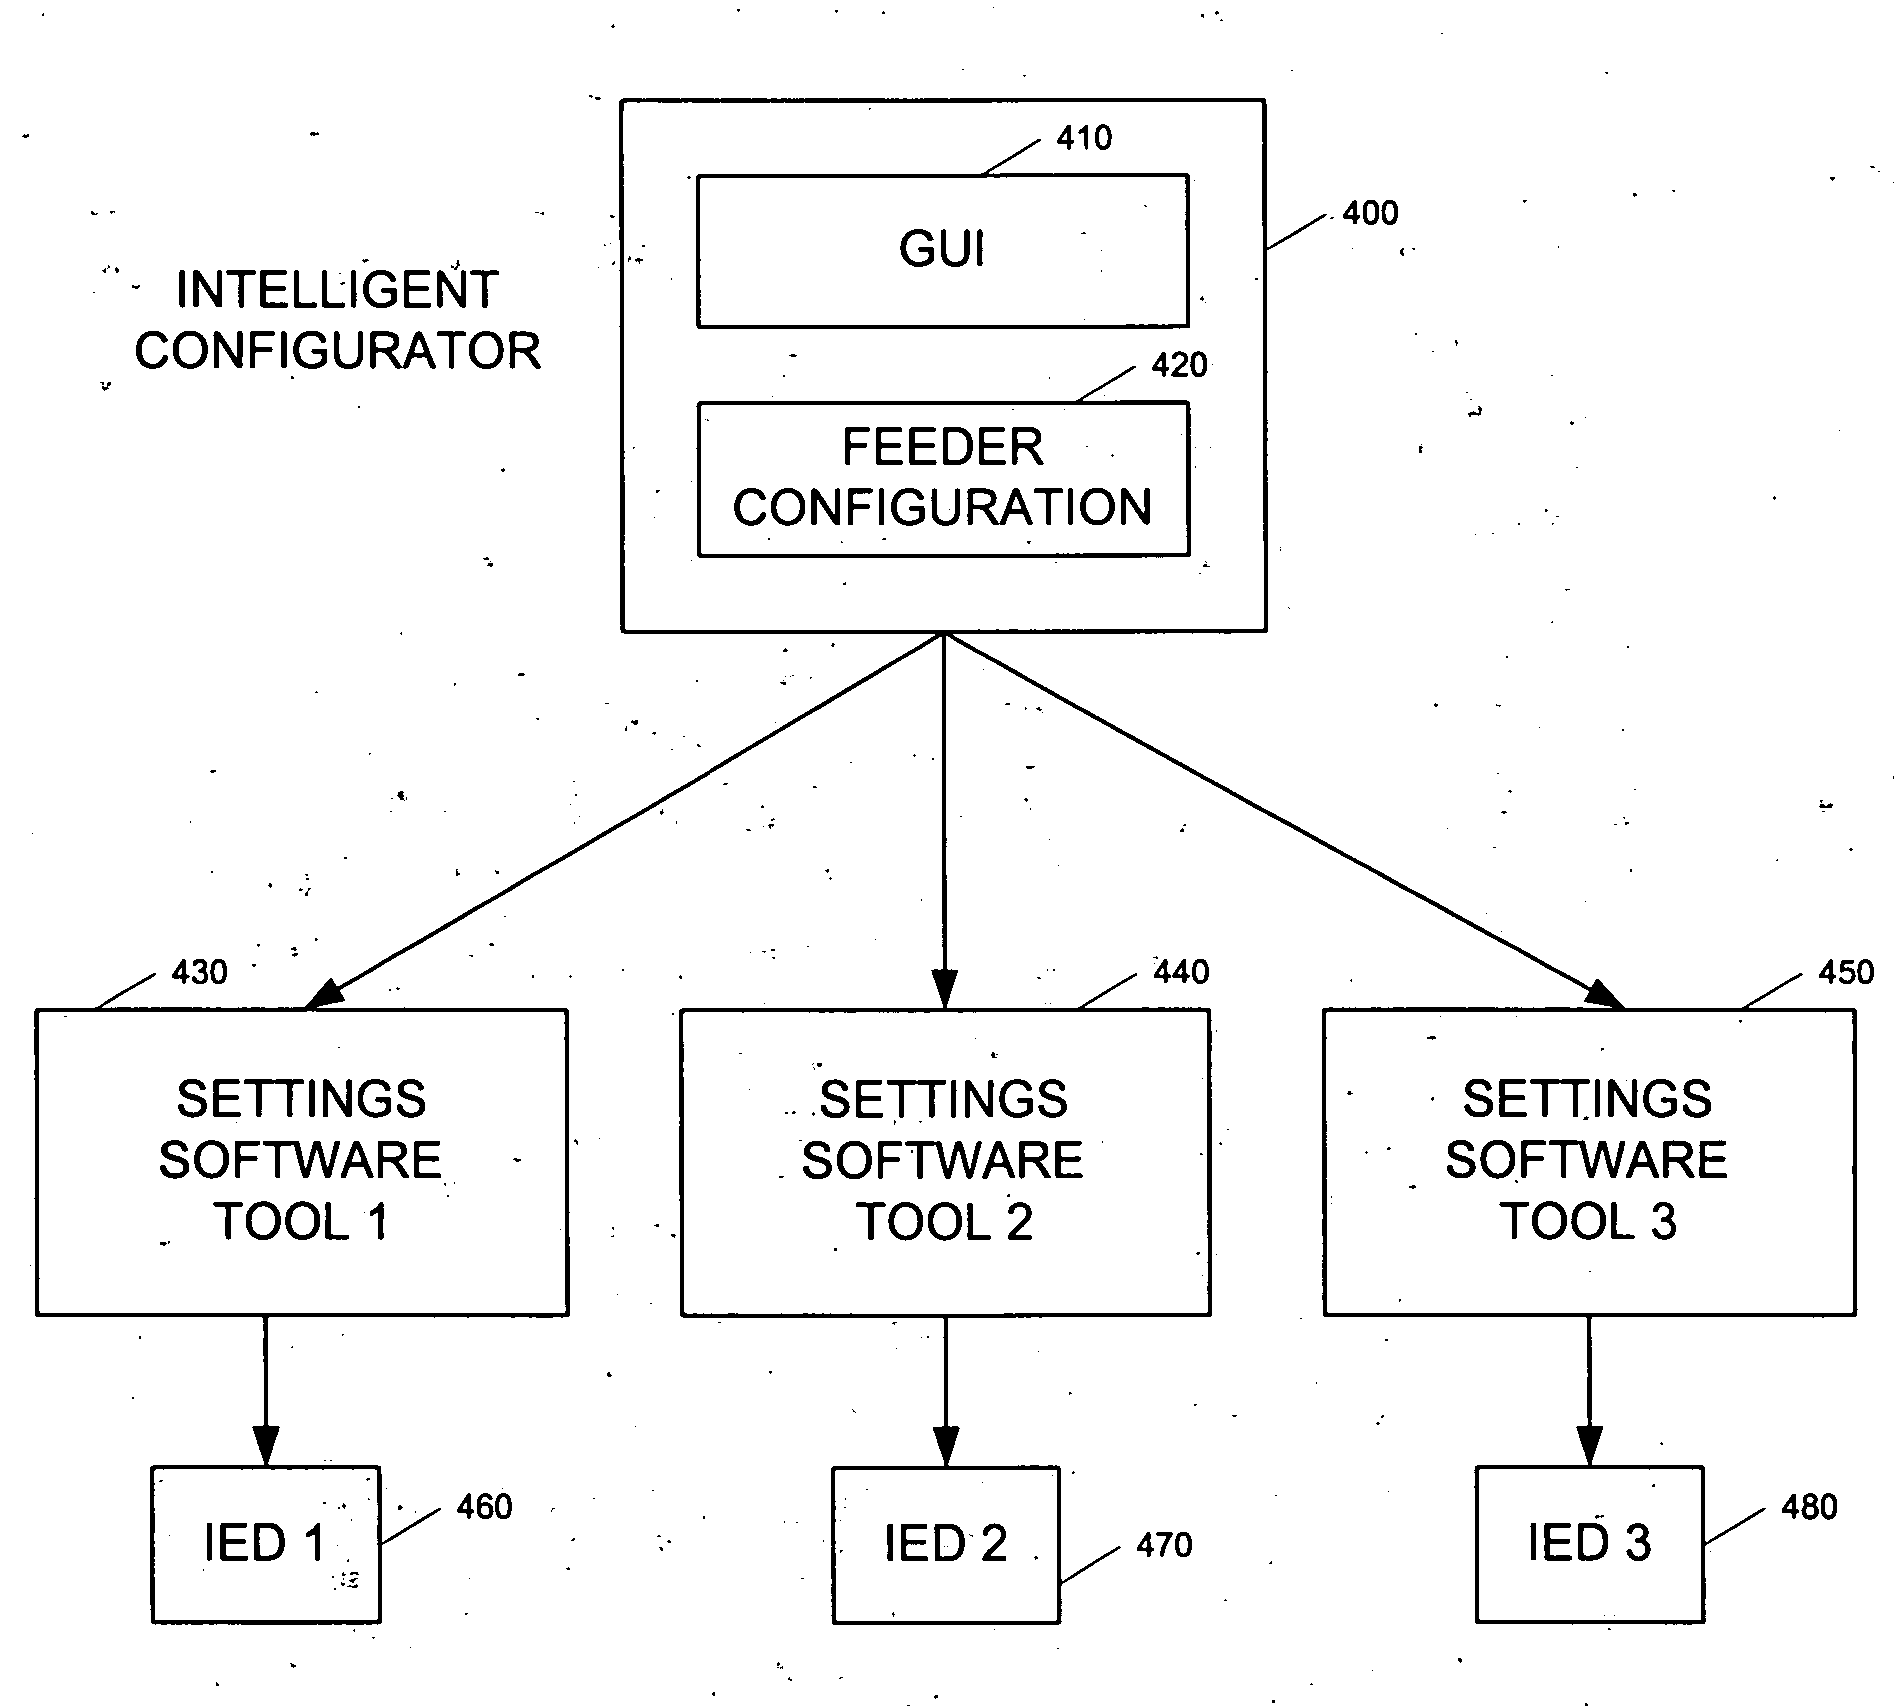 Automated intelligent configuration tool for power system protection and control and monitoring devices